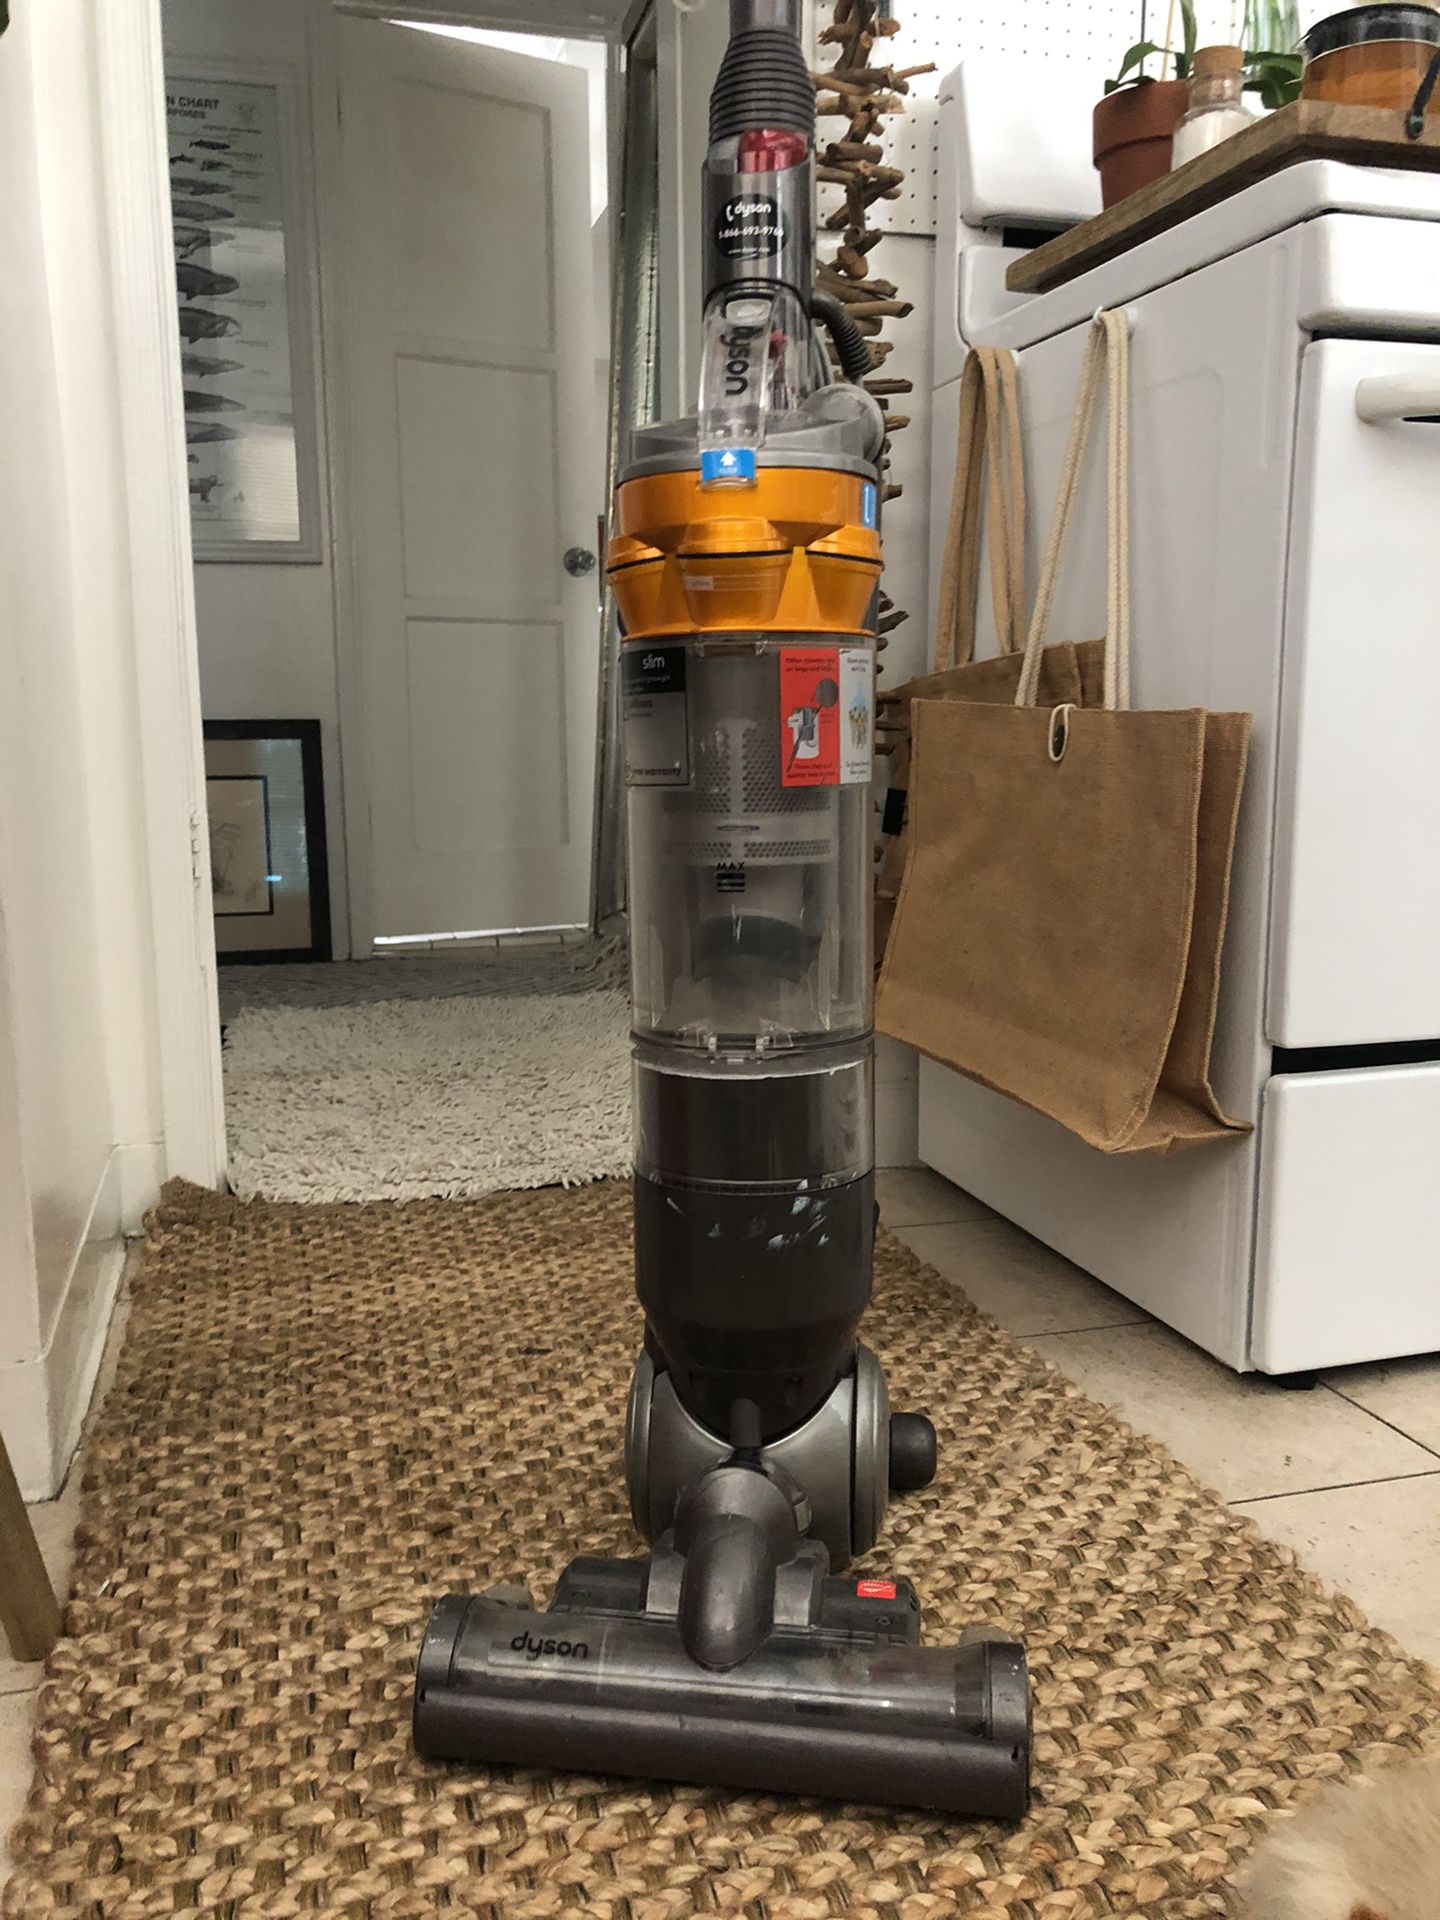 DYSON DC18 VACUUM $10 to a Black family in need of a vacuum